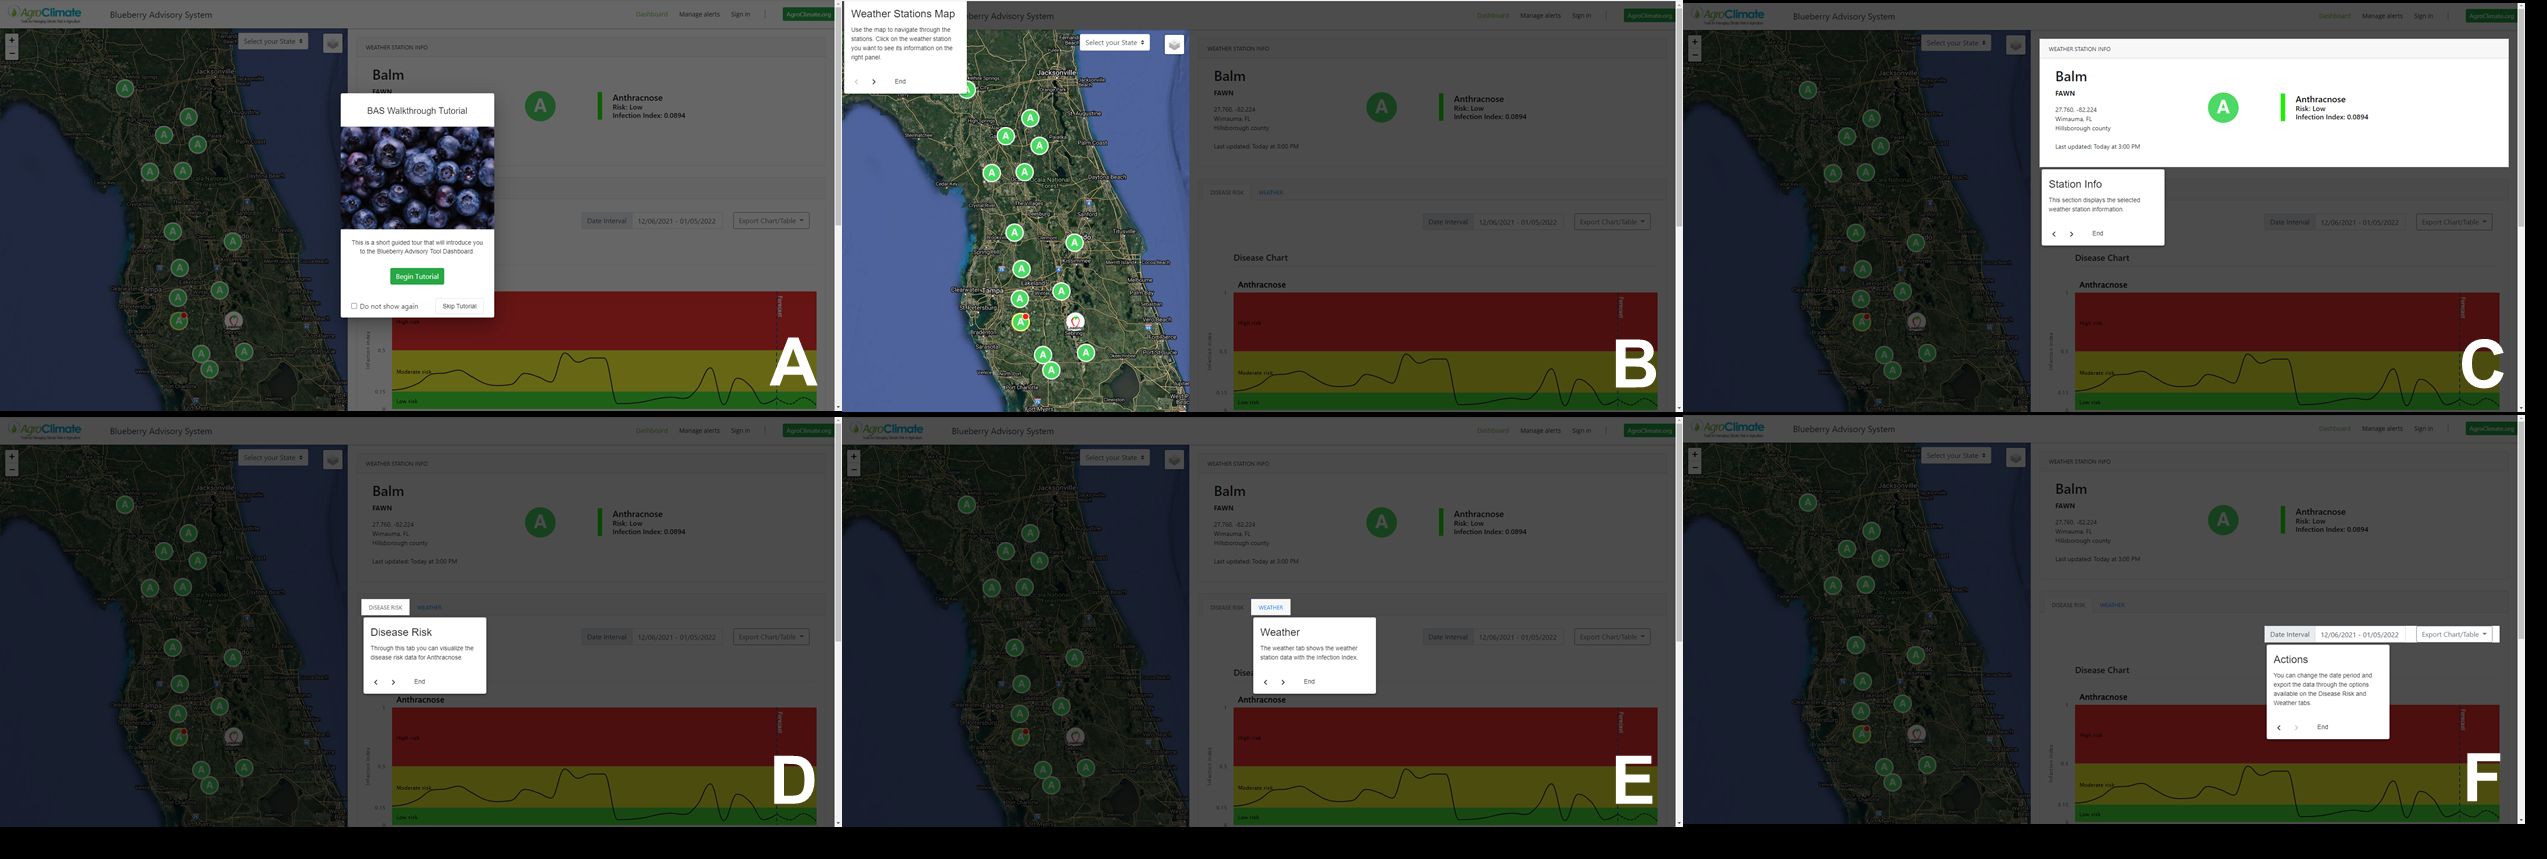 Walkthrough for new users. Prompted message to begin tutorial (A), weather station map (B), weather station info (C), disease risk tab (D), weather tab (E), action tab (F).